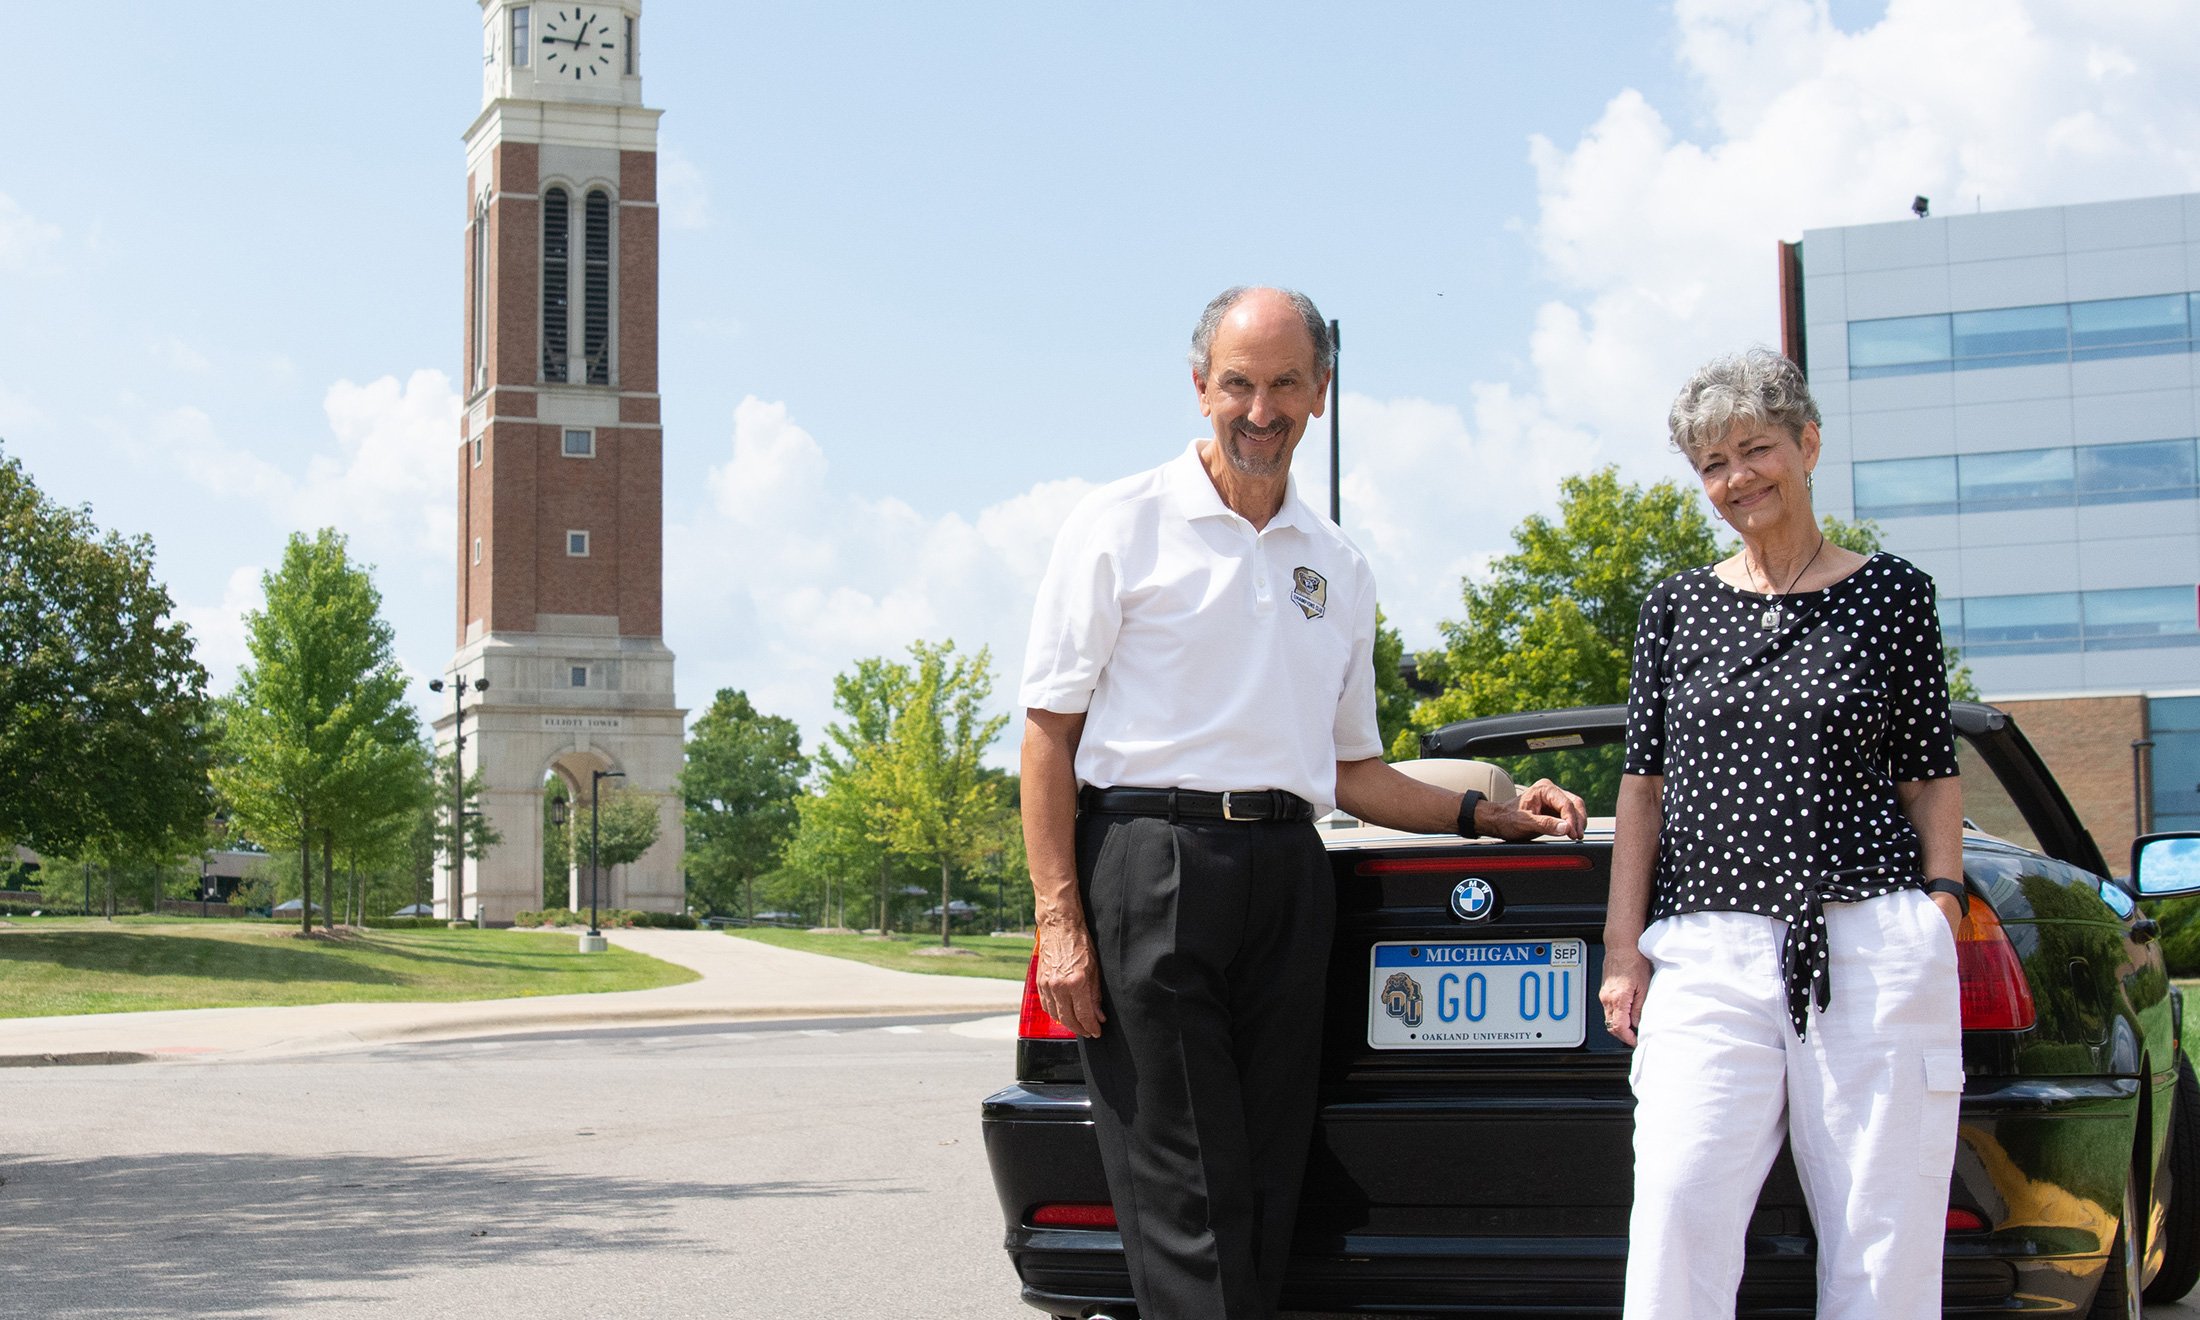 A man and woman posing in front of the rear-end of a car with a license plate that reads "GO OU"